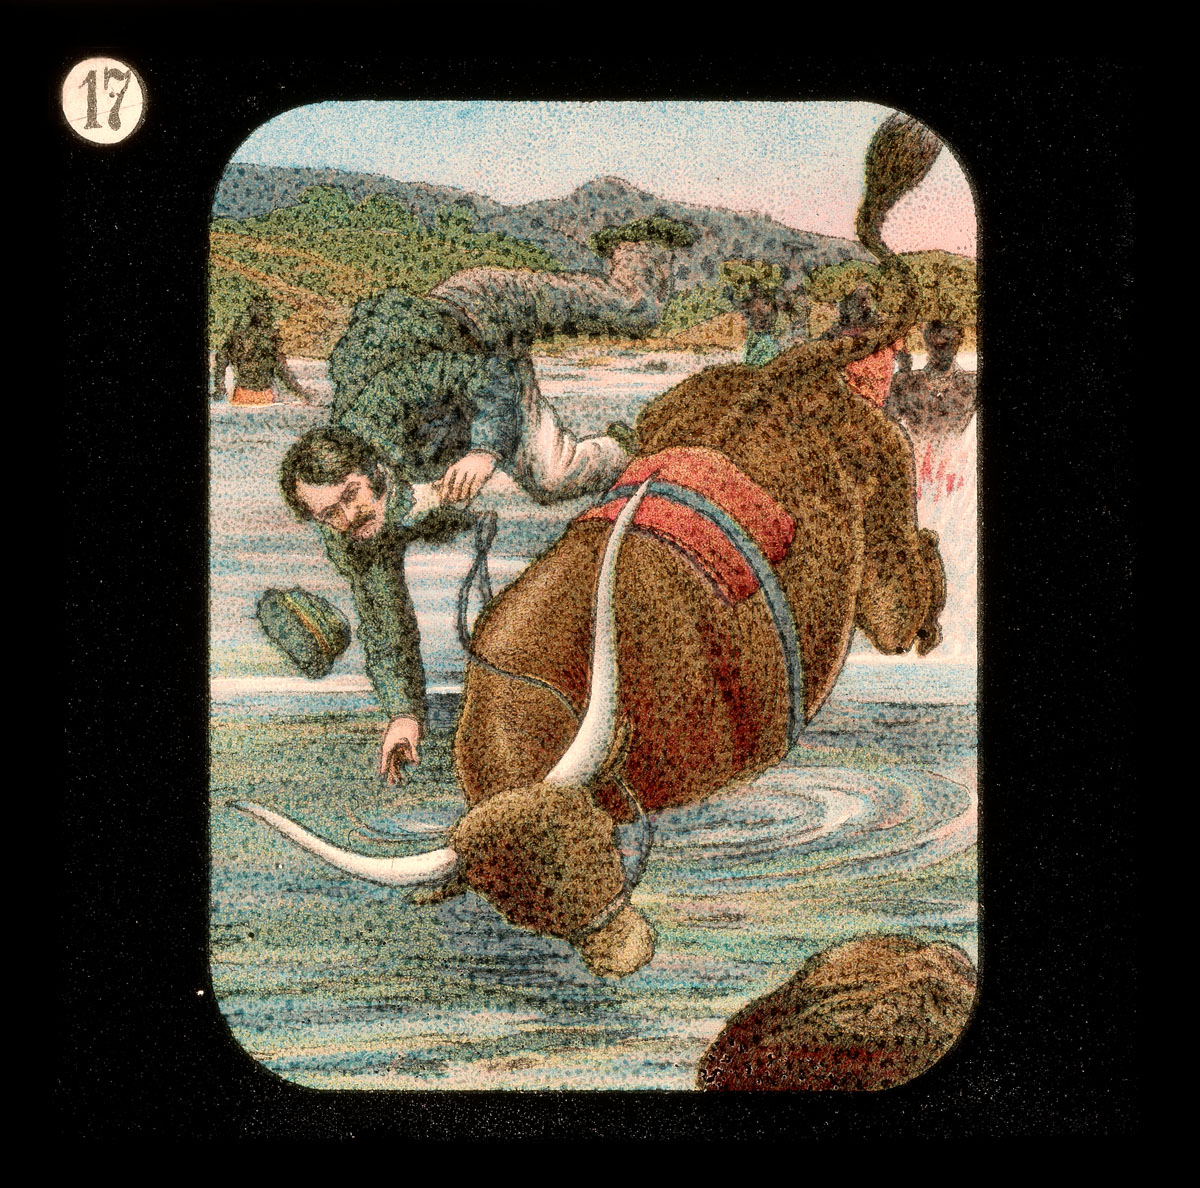 'Thrown from an Ox.' Image from Lantern Slides of the Life, Adventures, and Work of David Livingstone, Date Unknown: [17]. Image courtesy of the Smithsonian Libraries, Washington, D.C.